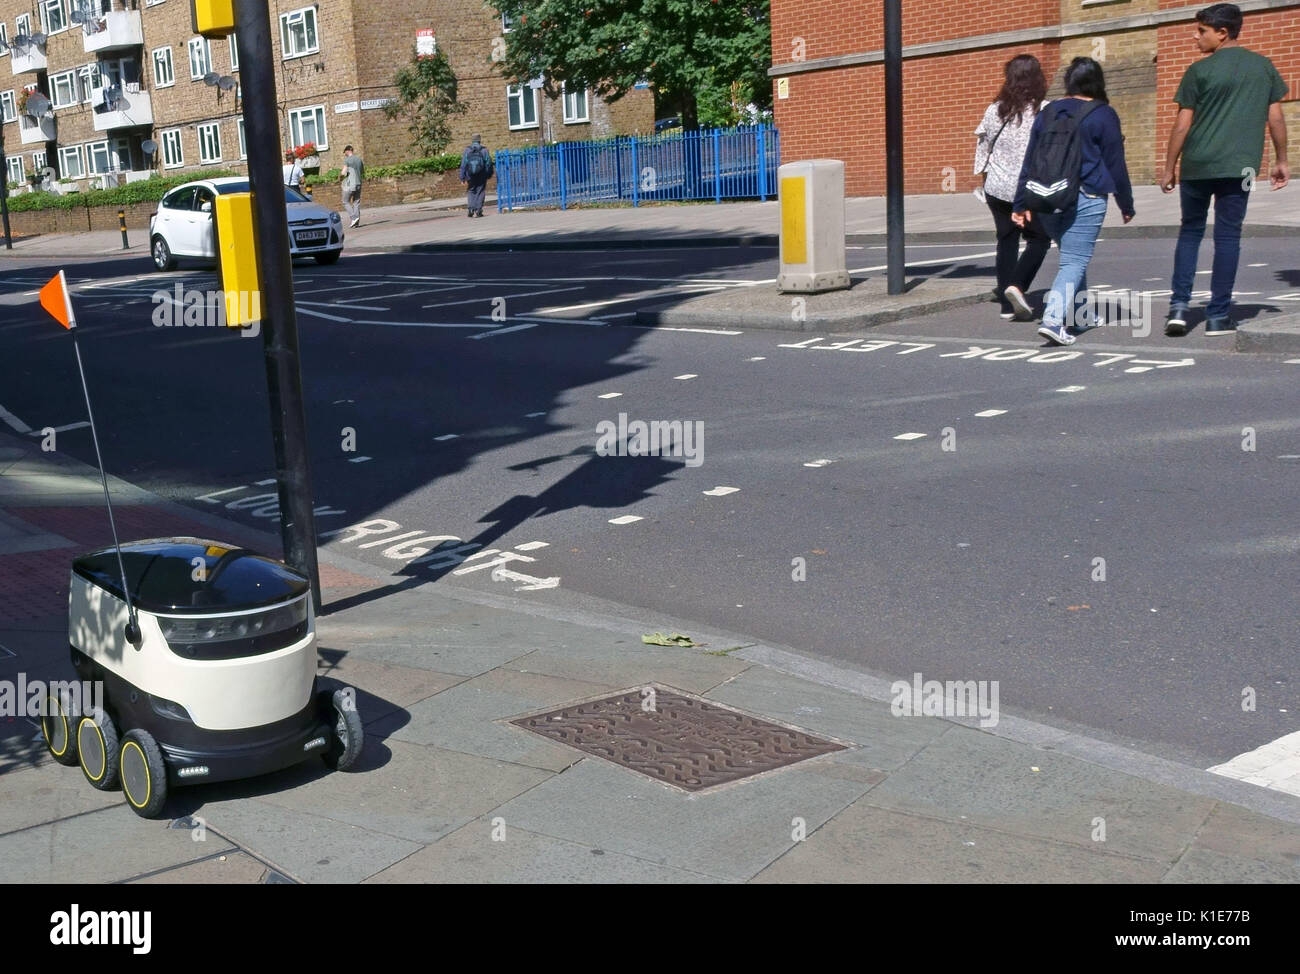 Borough, London, UK. 25th Aug, 2017. Food delivery robots made by Starship Technologies have gone on trial in London. The six-wheeled autonmous vehicles are being prepared to undertake take-out home deliveries for two major food outlets. At present they are accompanied by human handlers. Please credit pictures by (C) Credit: Jeffrey Blackler/Alamy Live News Stock Photo